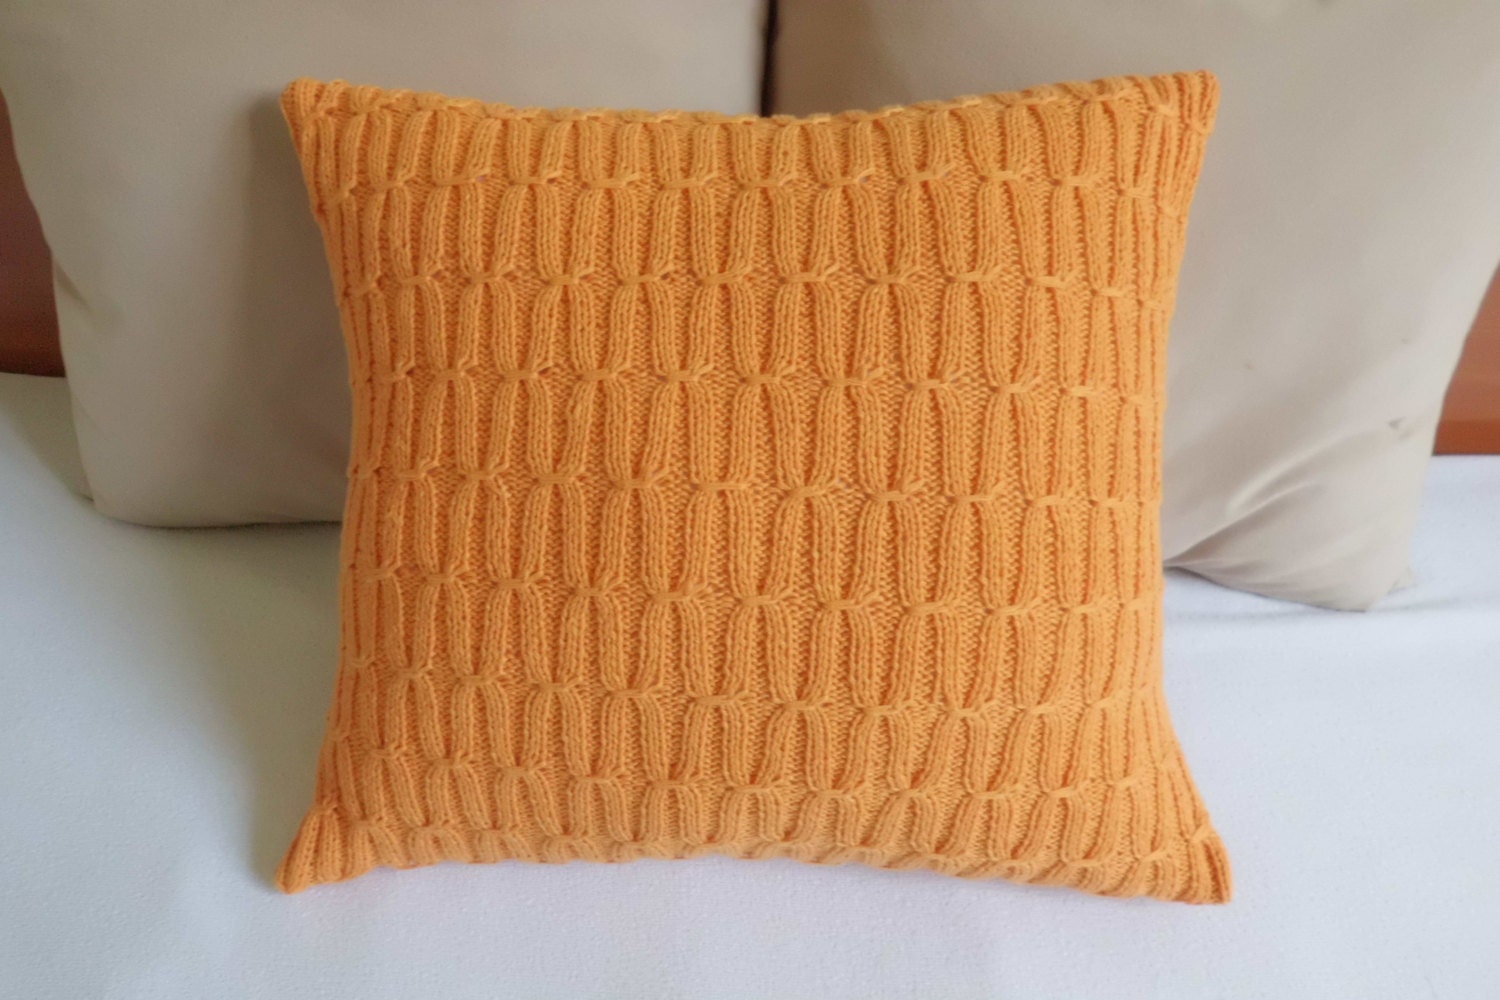 Tangerine knitted cushion, orange14x14 couch pillow, nectarine cable knit pillow, decorative pillowcover, knitted pillow cover, knitt throw - Adorablewares